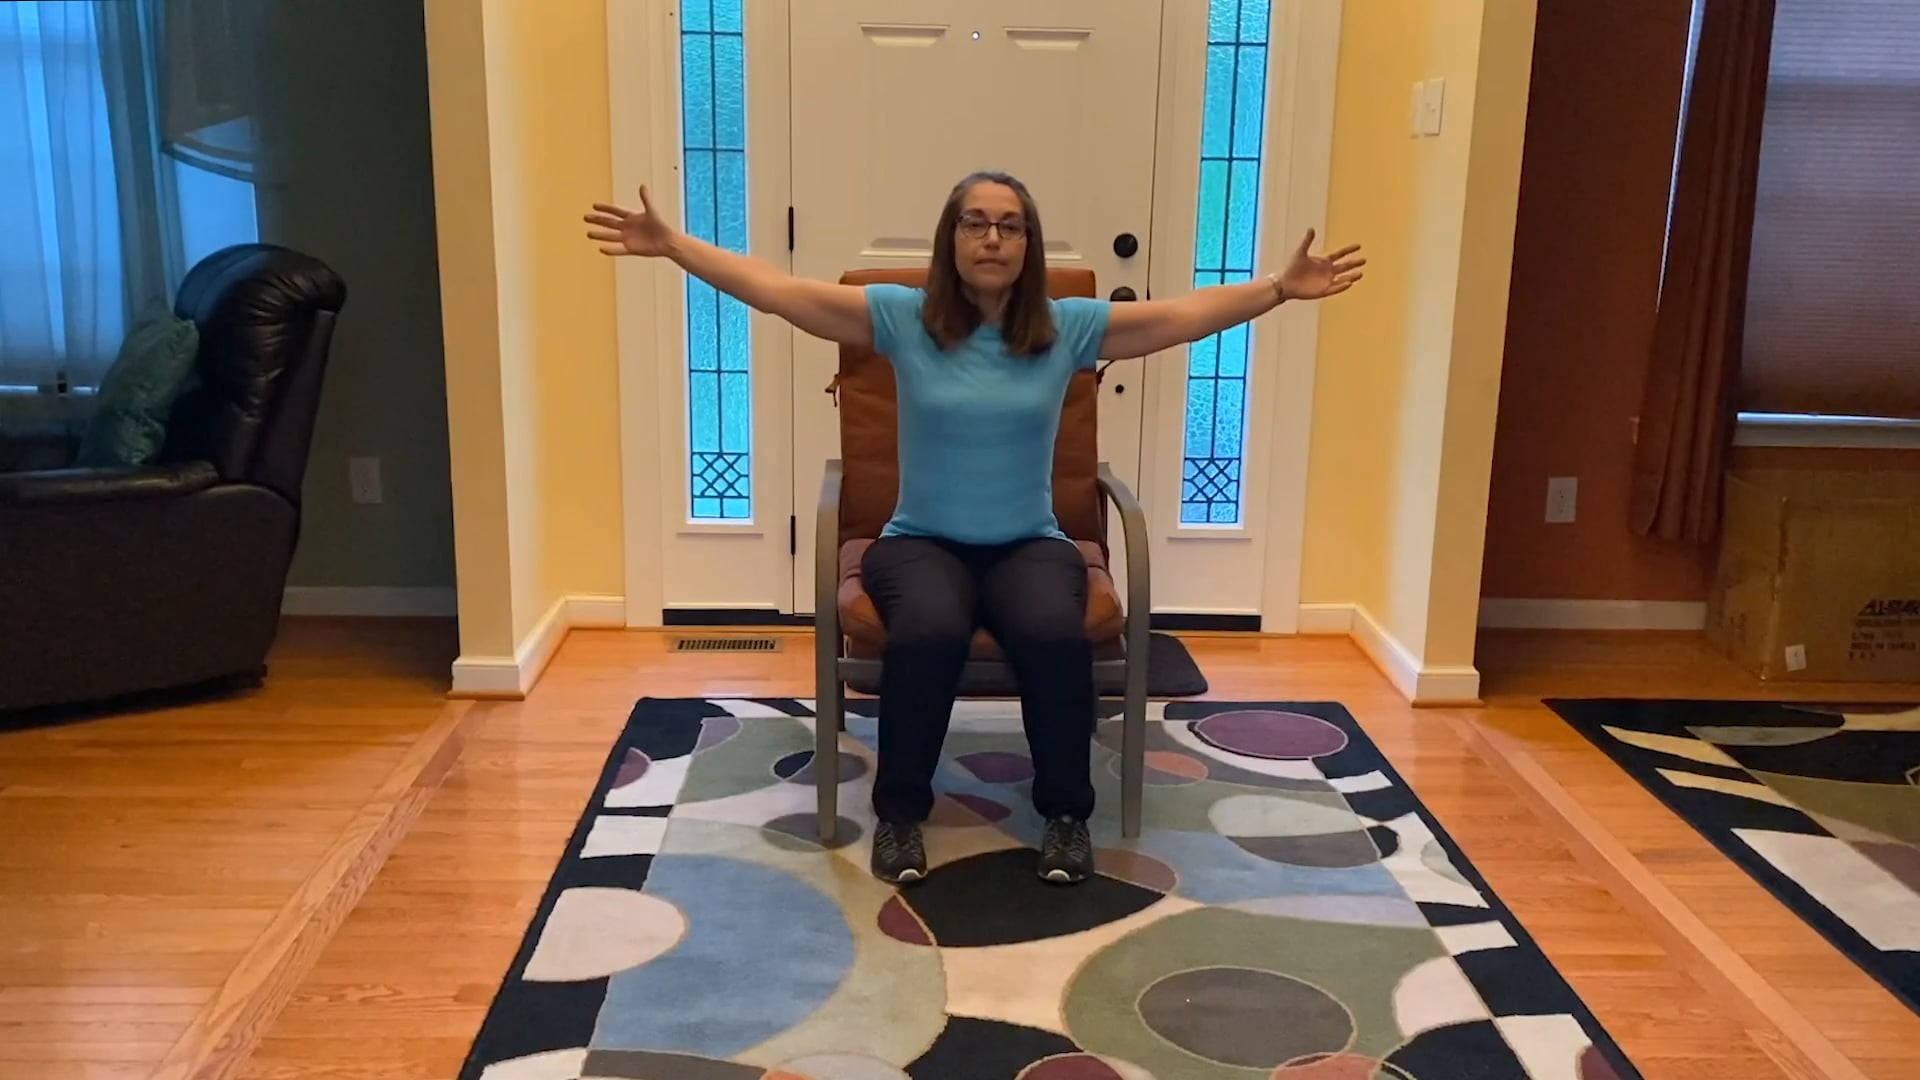 A person does an exercise in a chair